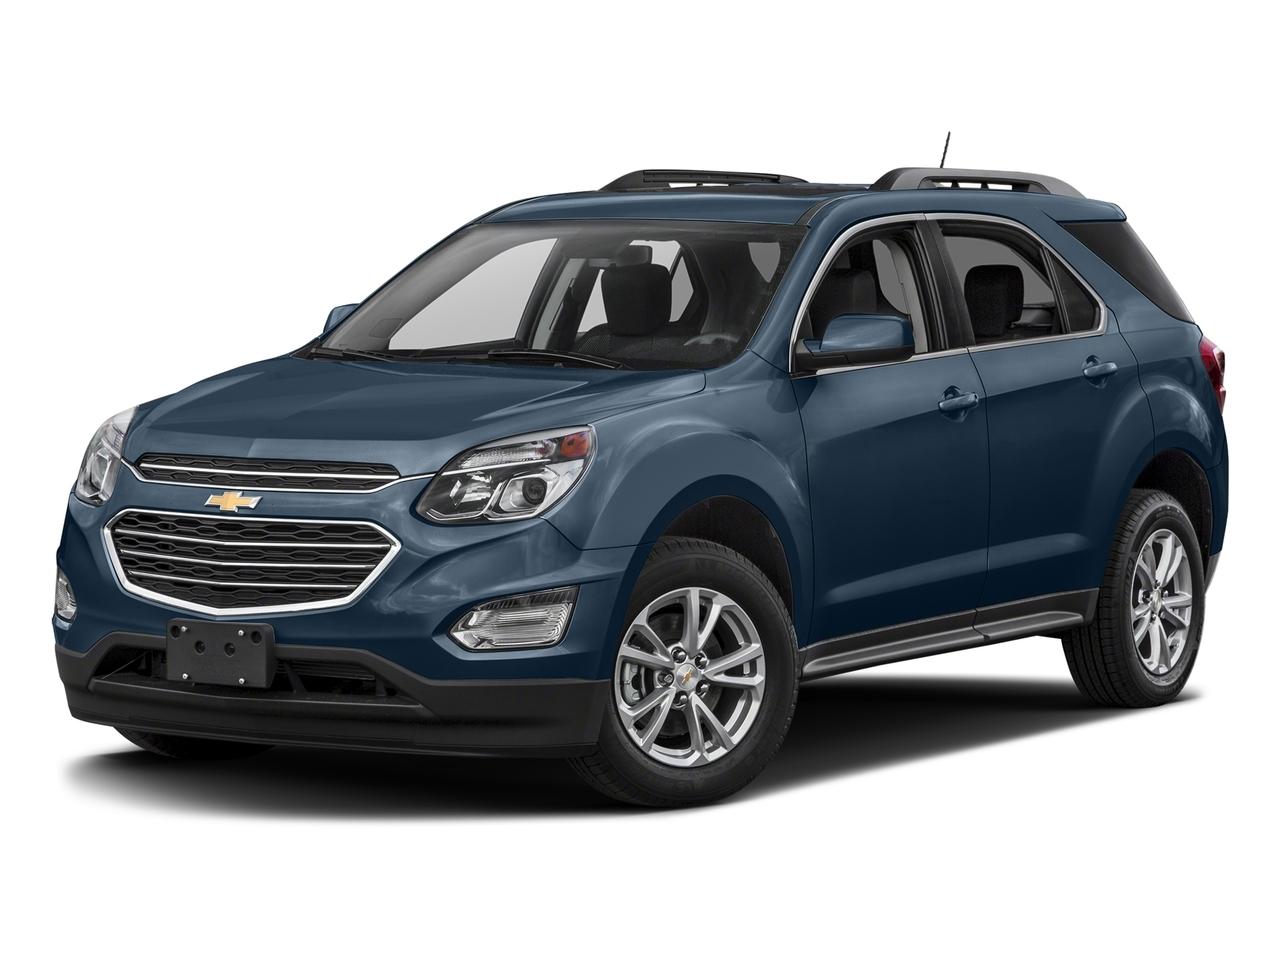 2017 Chevrolet Equinox Vehicle Photo in Plainfield, IL 60586